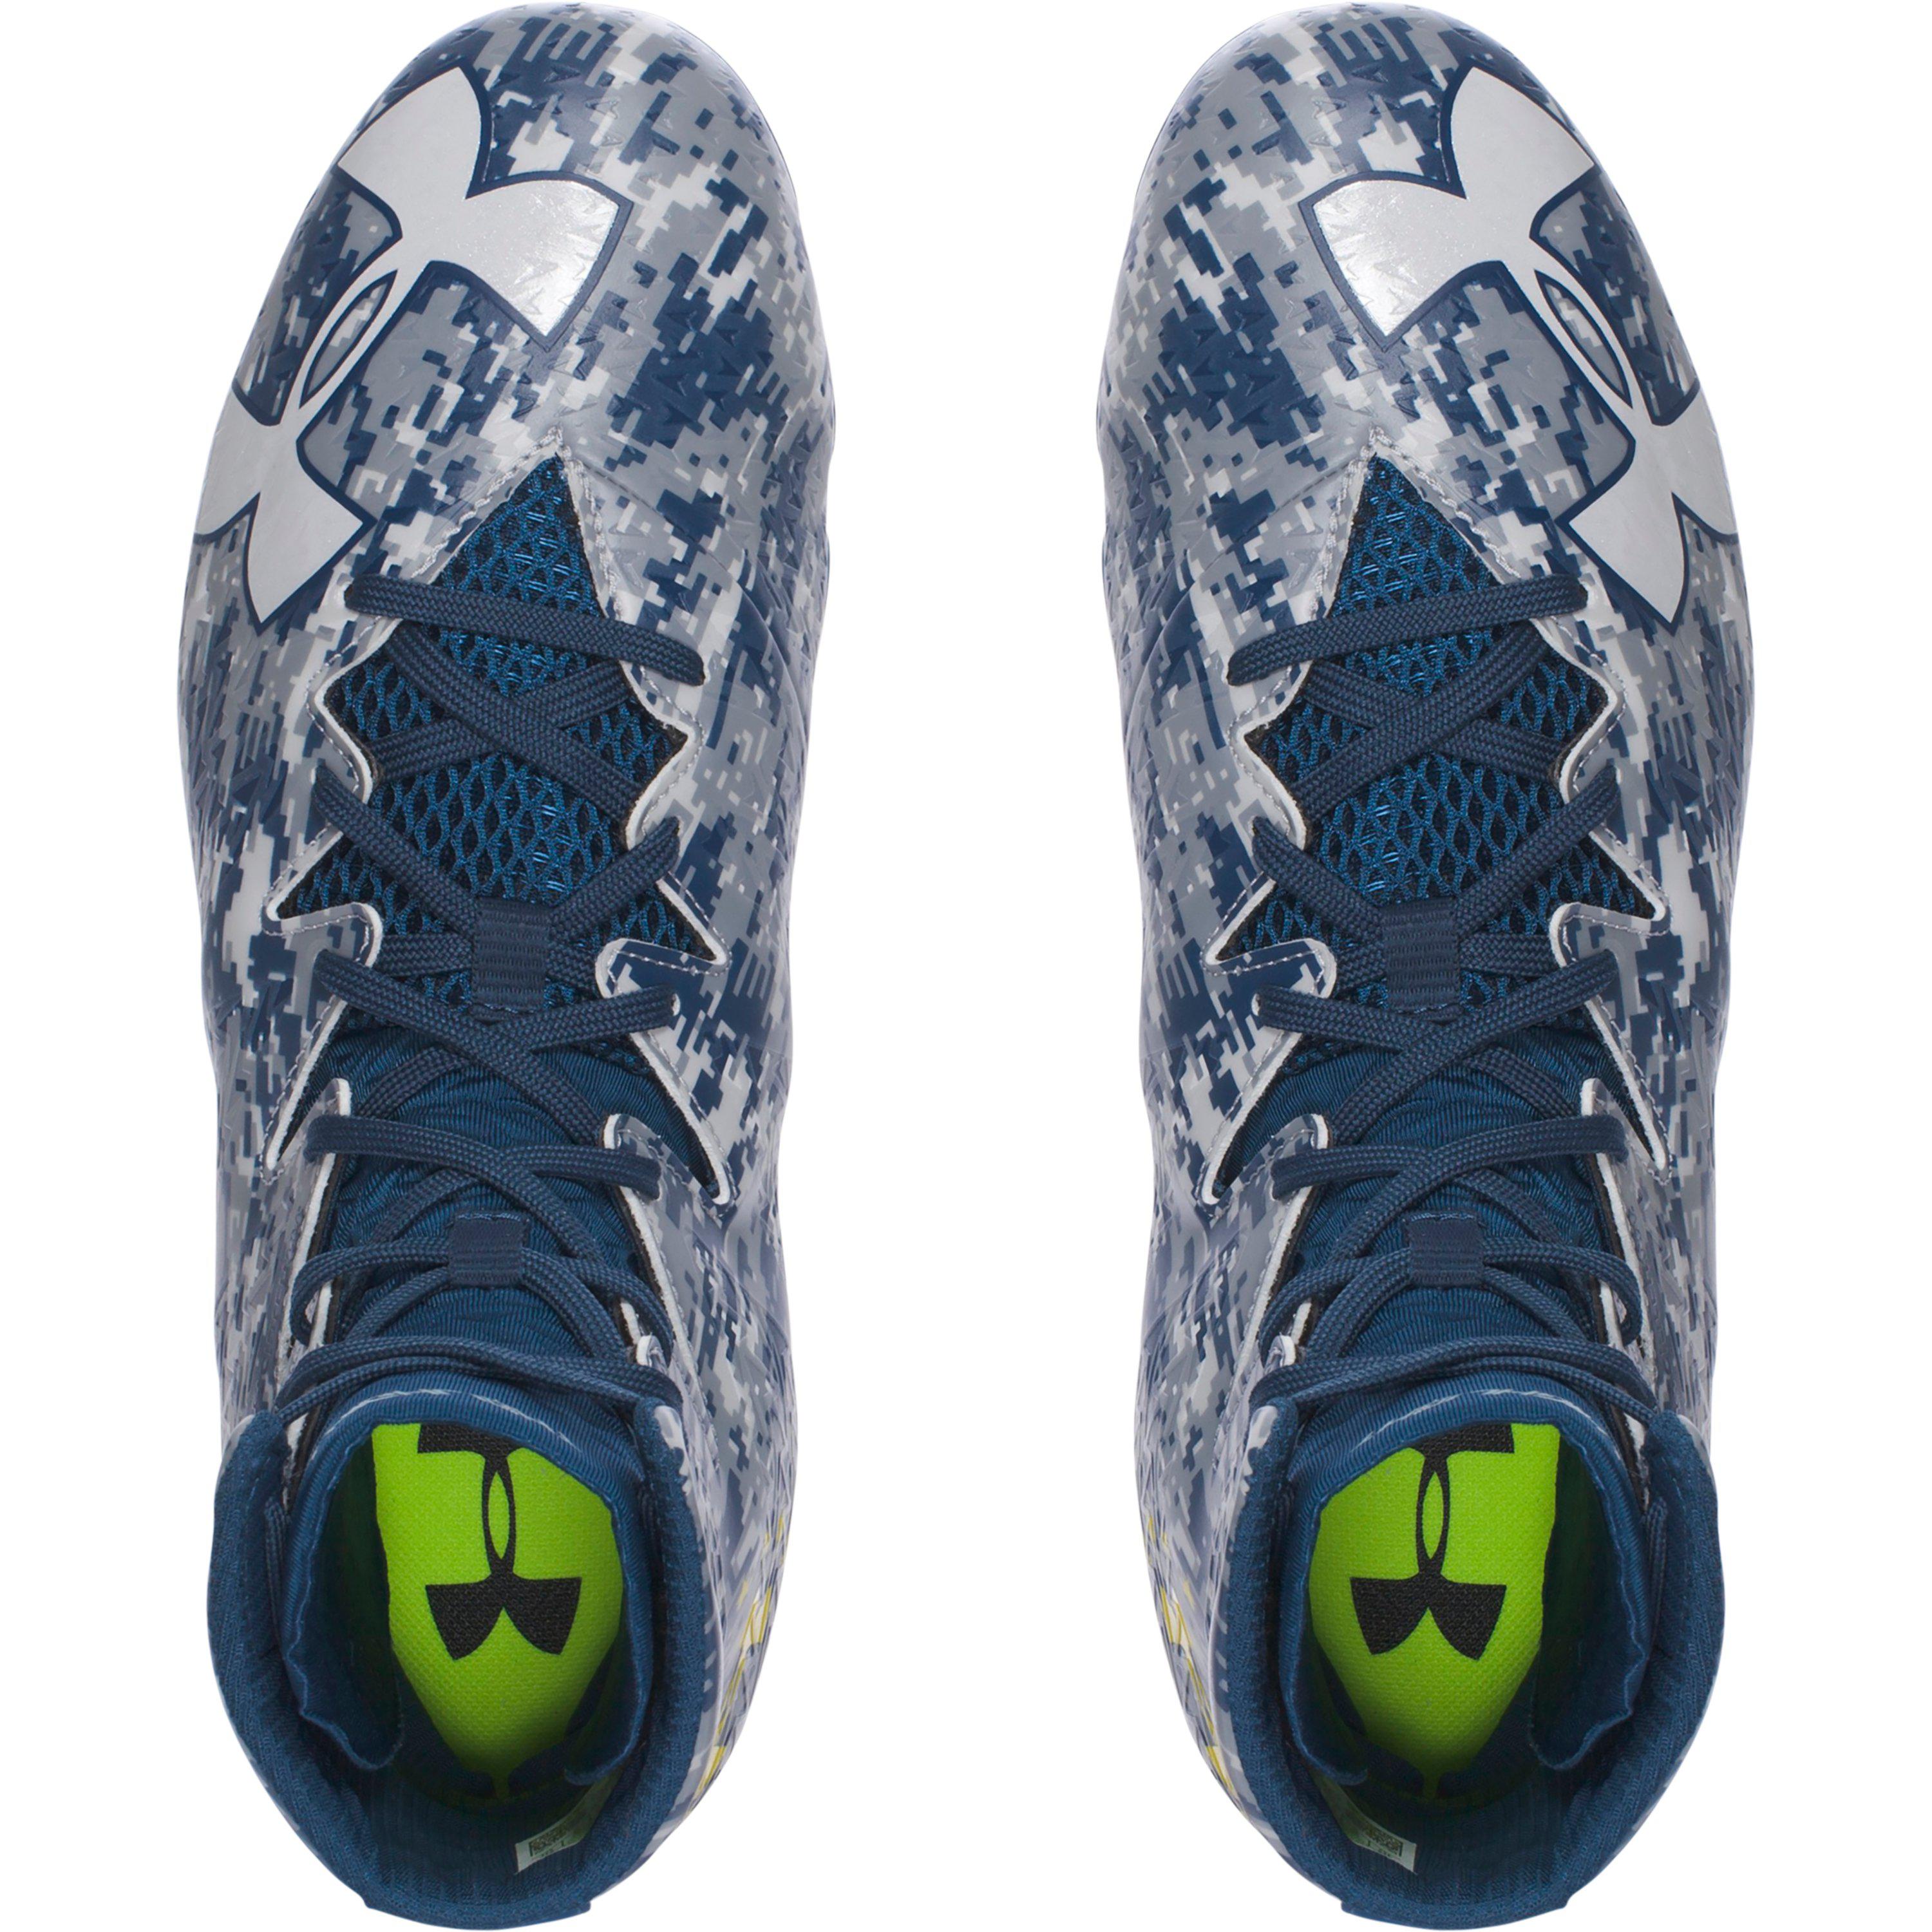 NEW Under Armour Men's UA Highlight MC LIMITED EDITION  Football Cleats Spikes 